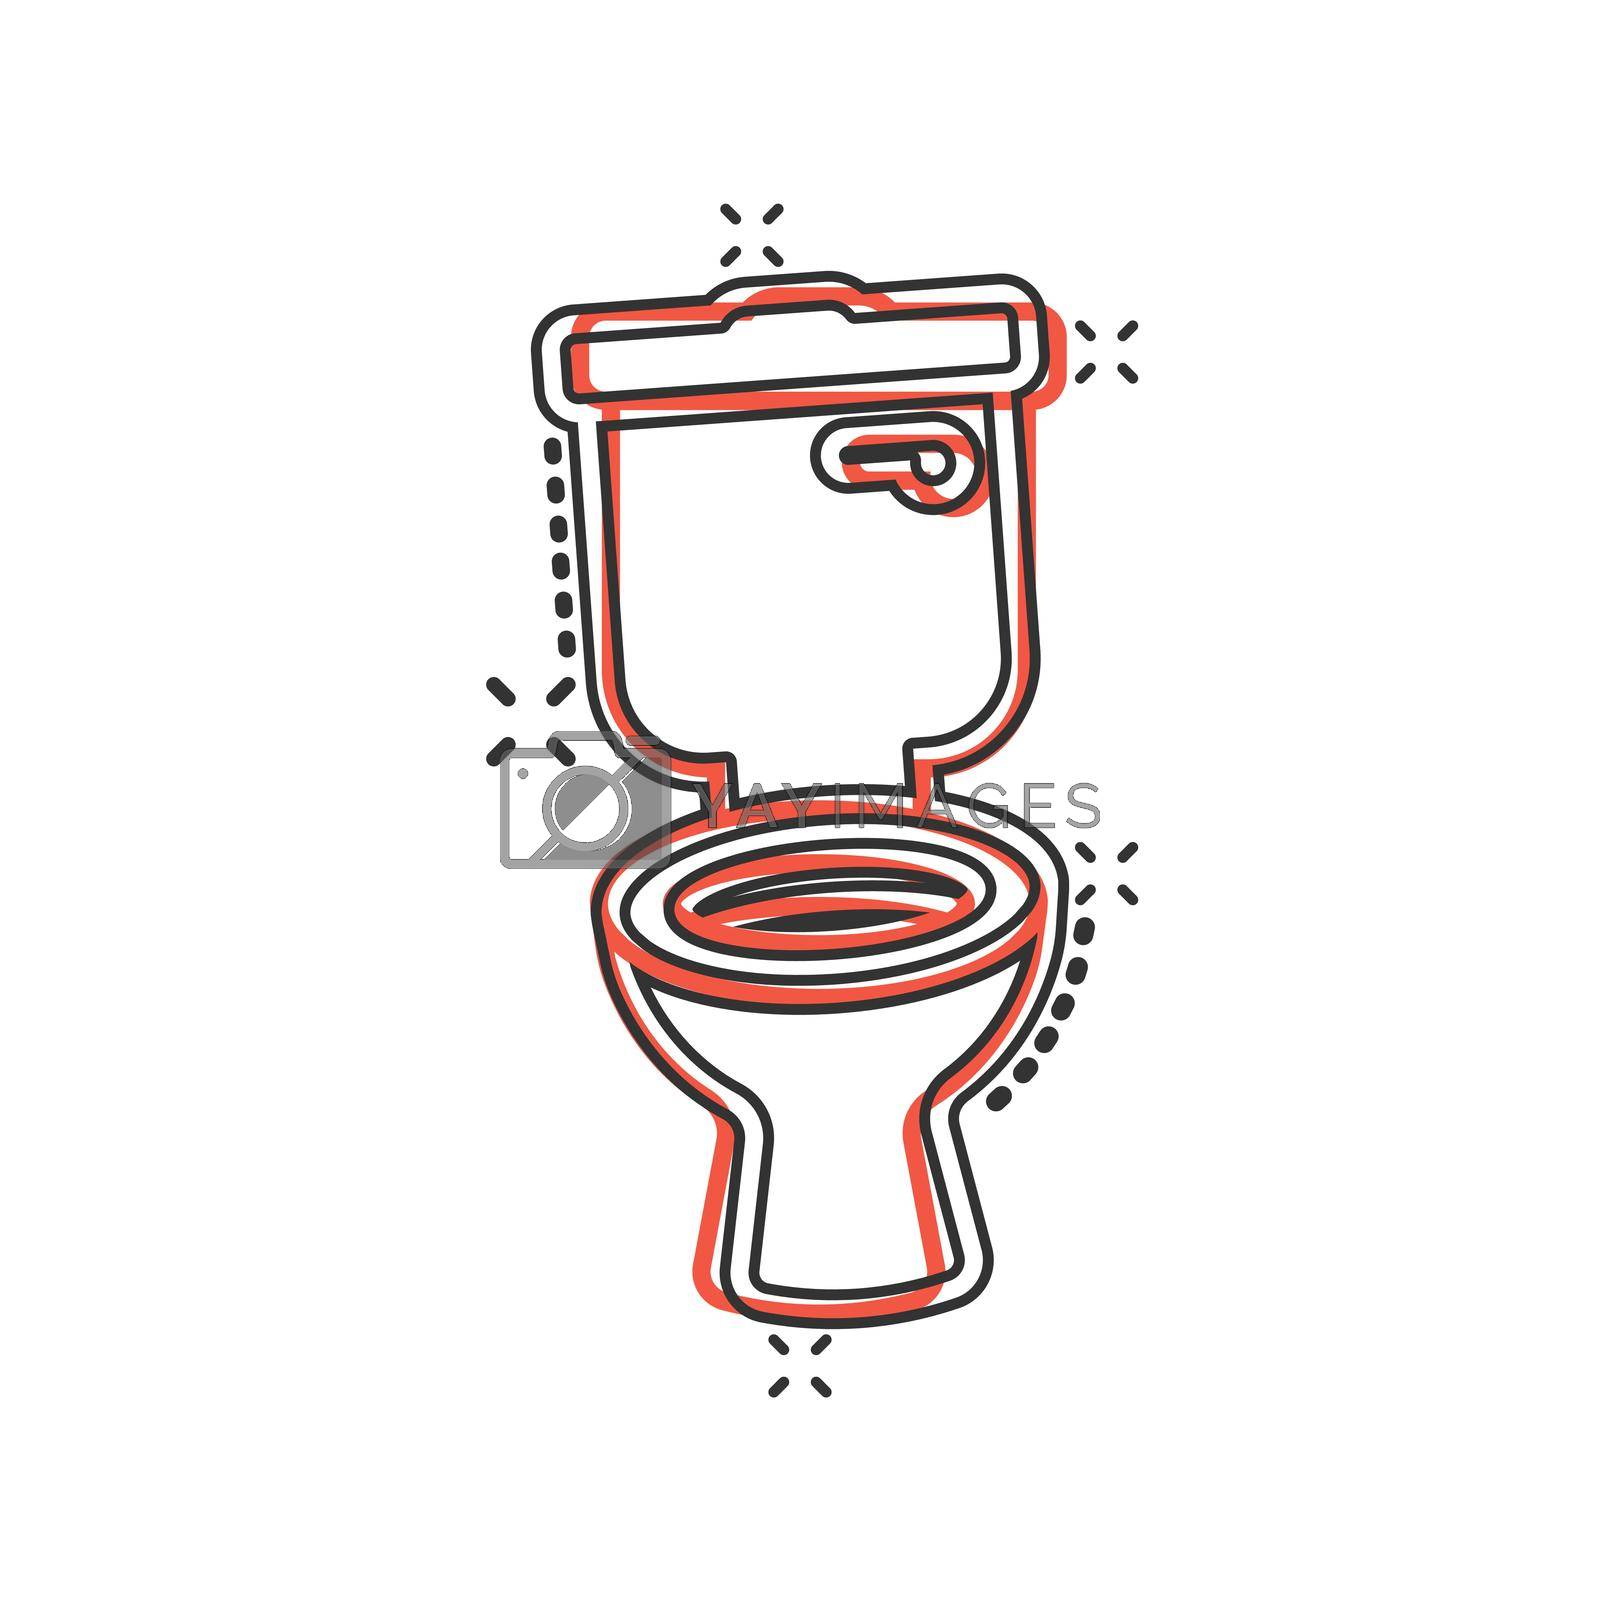 Royalty free image of Toilet bowl icon in comic style. Hygiene cartoon vector illustration on isolated background. WC restroom splash effect sign business concept. by LysenkoA